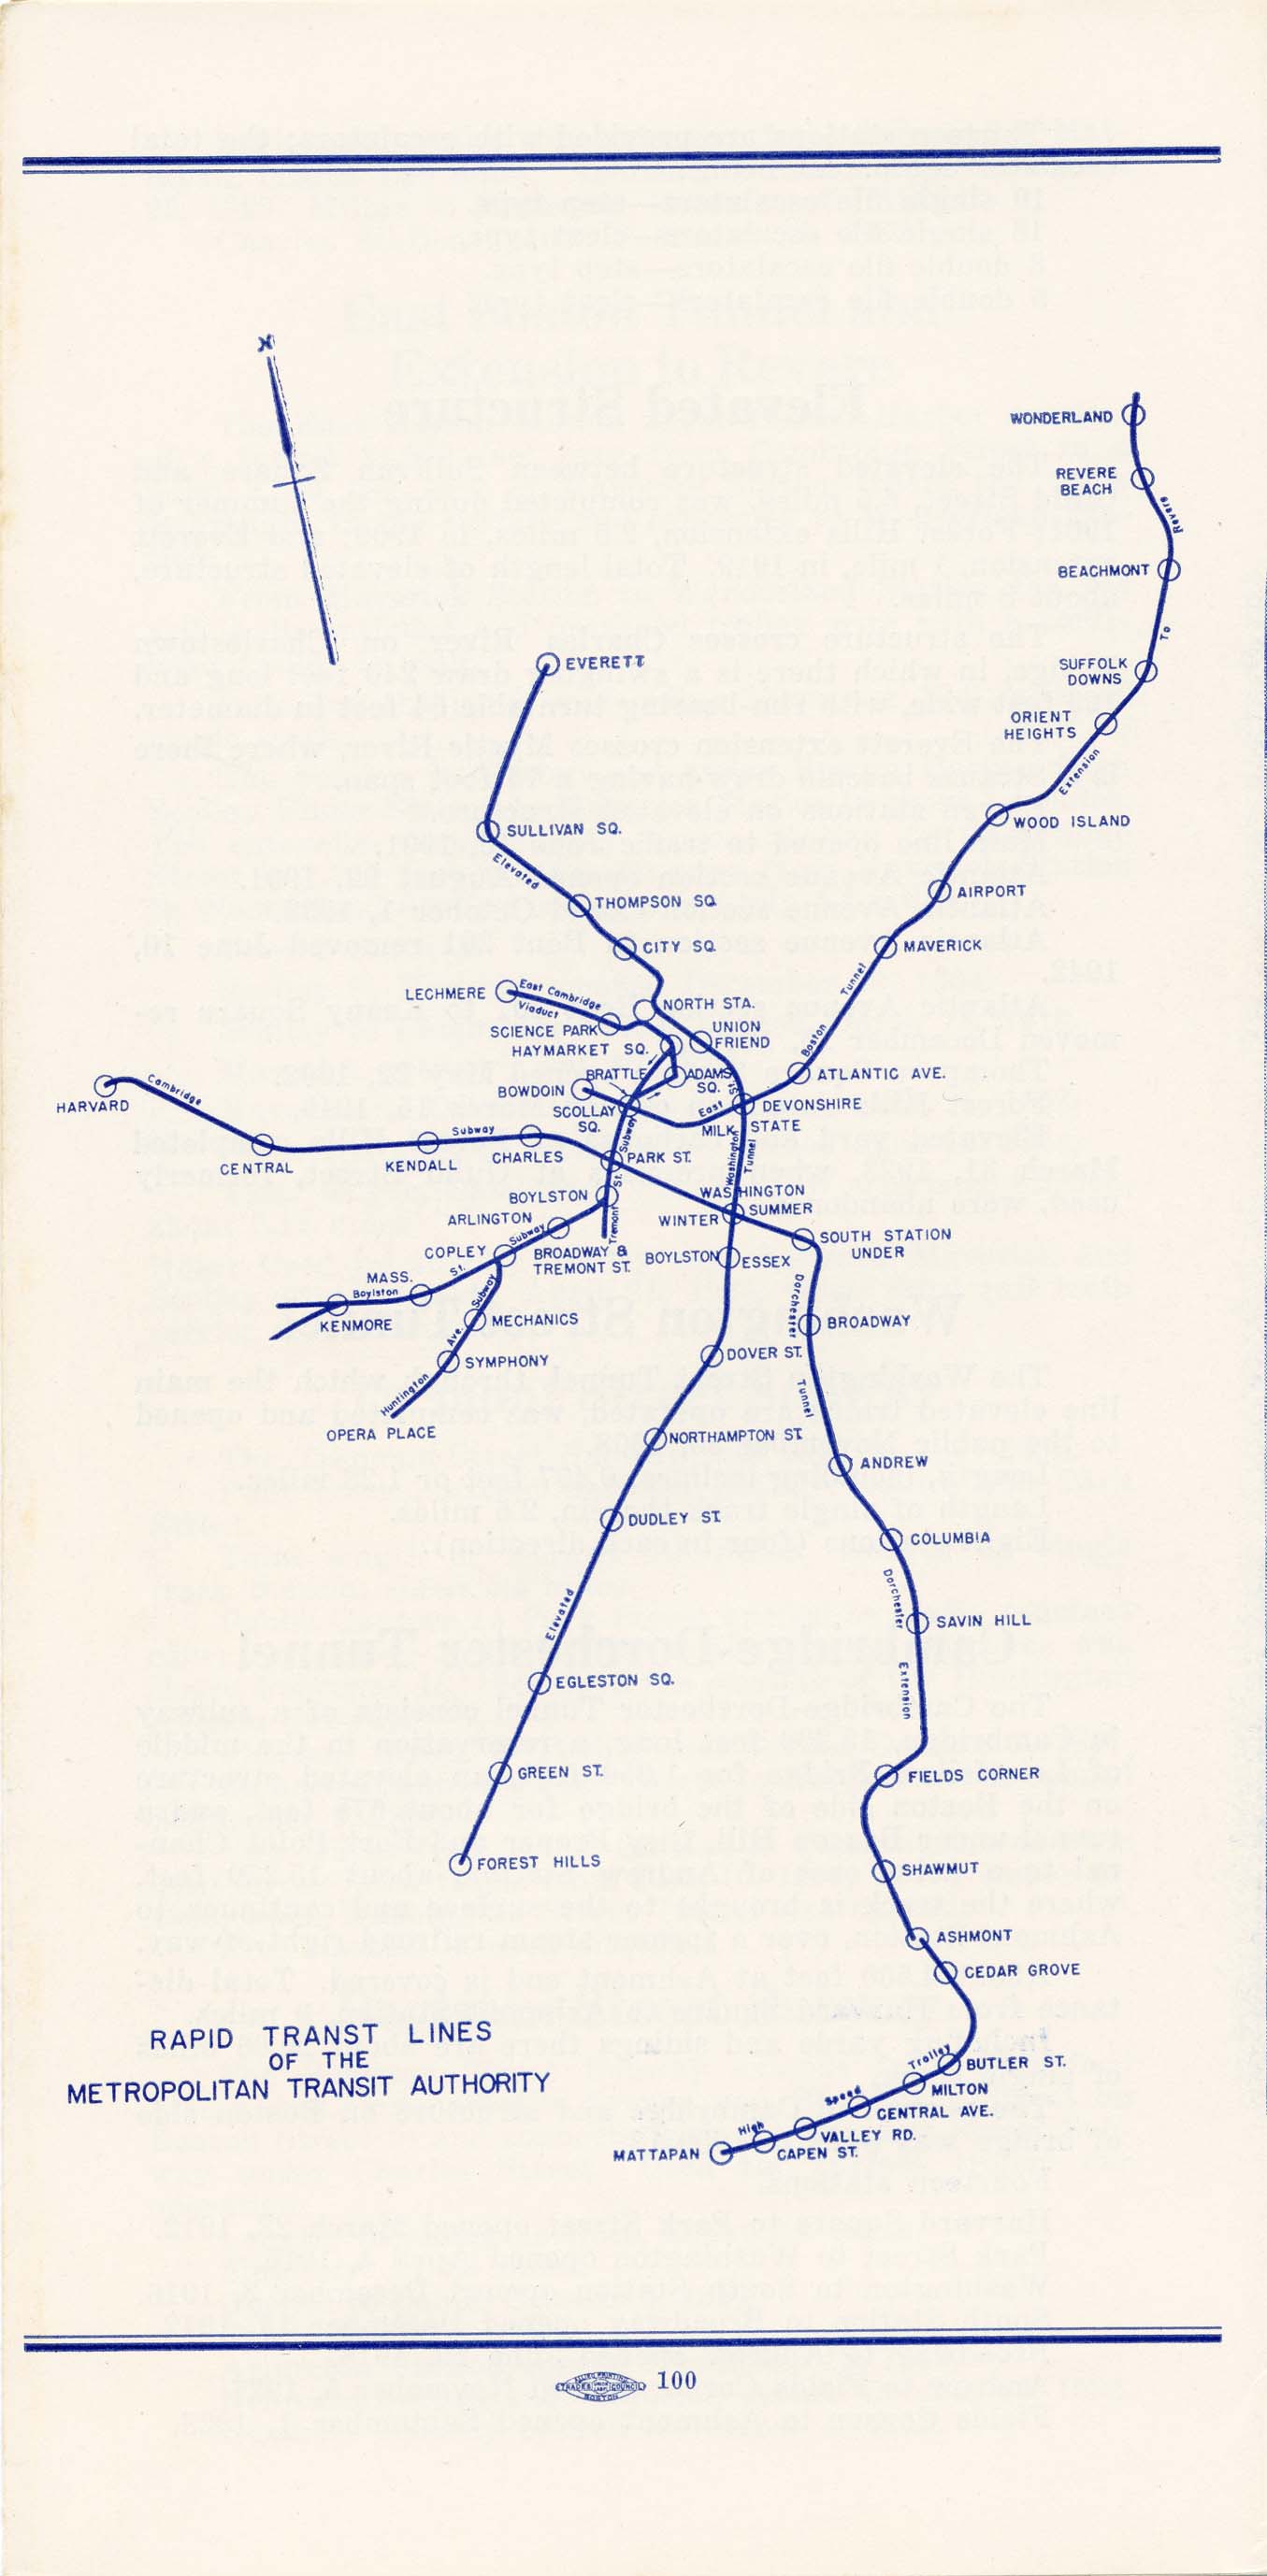 Image of Rapid Transt [sic] Lines of the Metropolitan Transit Authority